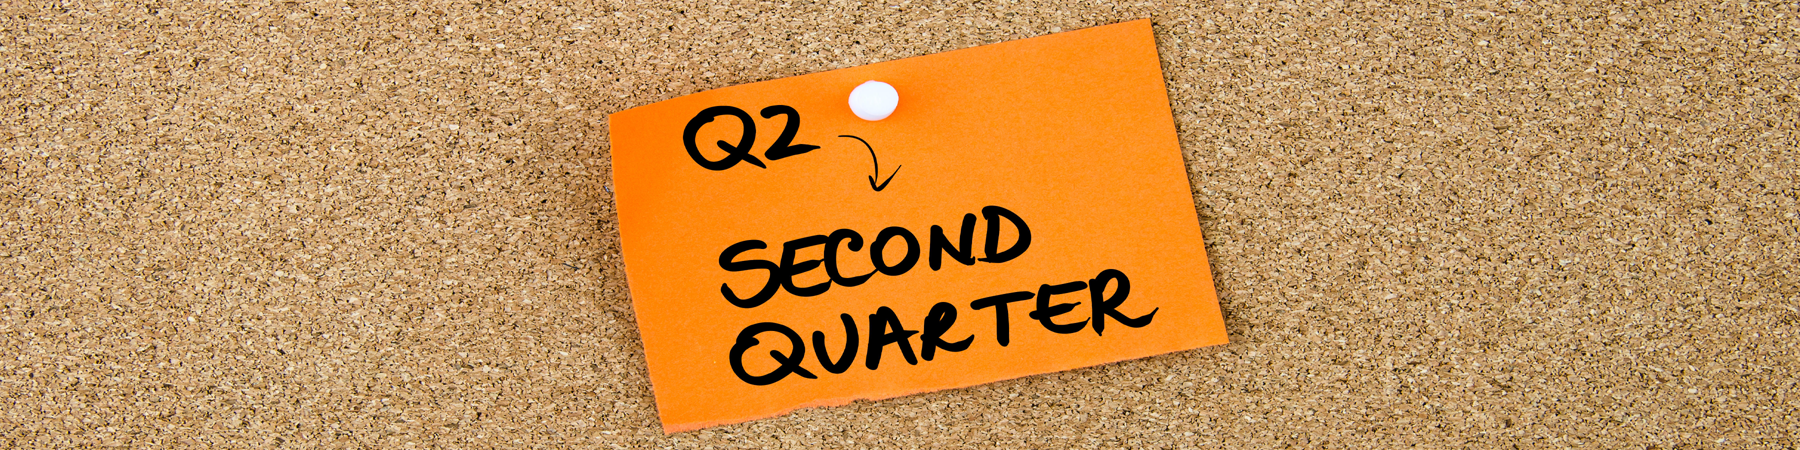 Two Things to measure in Q2